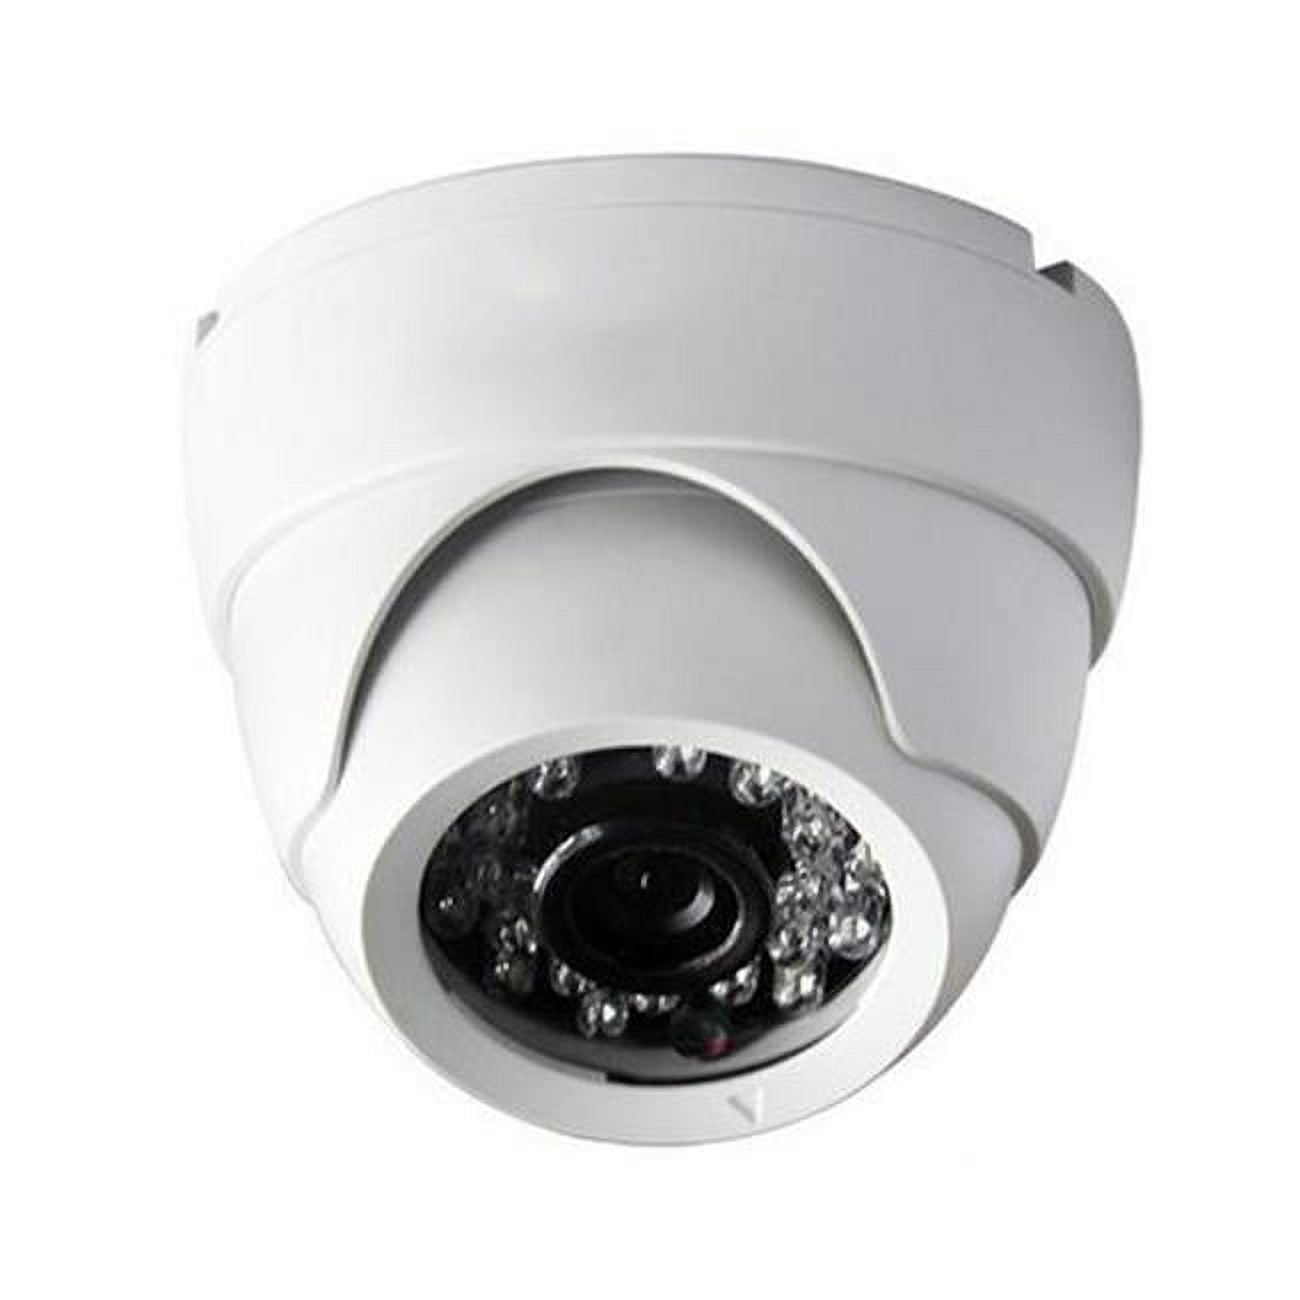 Picture of ABL TV-DF8 2 Megapixel 1080P High Definition HD-TVI IR Dome Camera with 8mm Lens